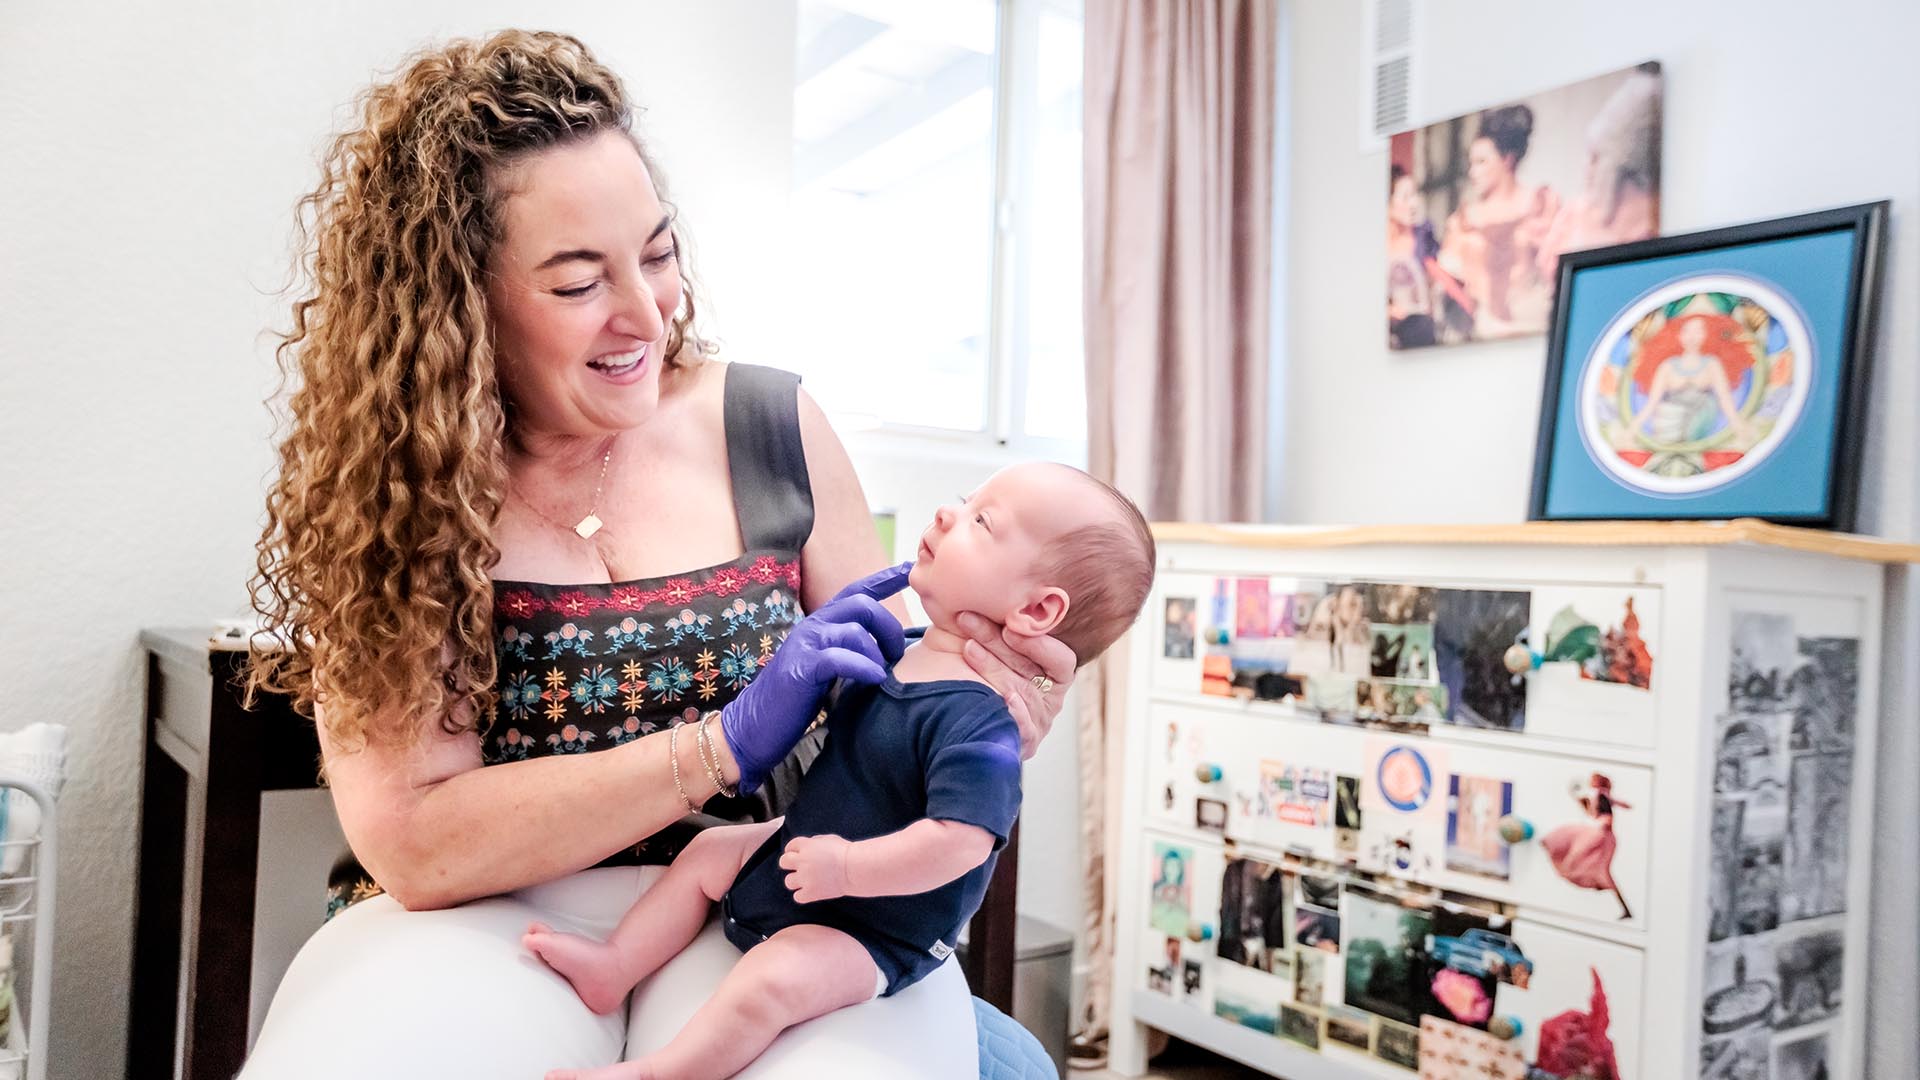 As baby formula shortages persist, breastfeeding education gets a boost